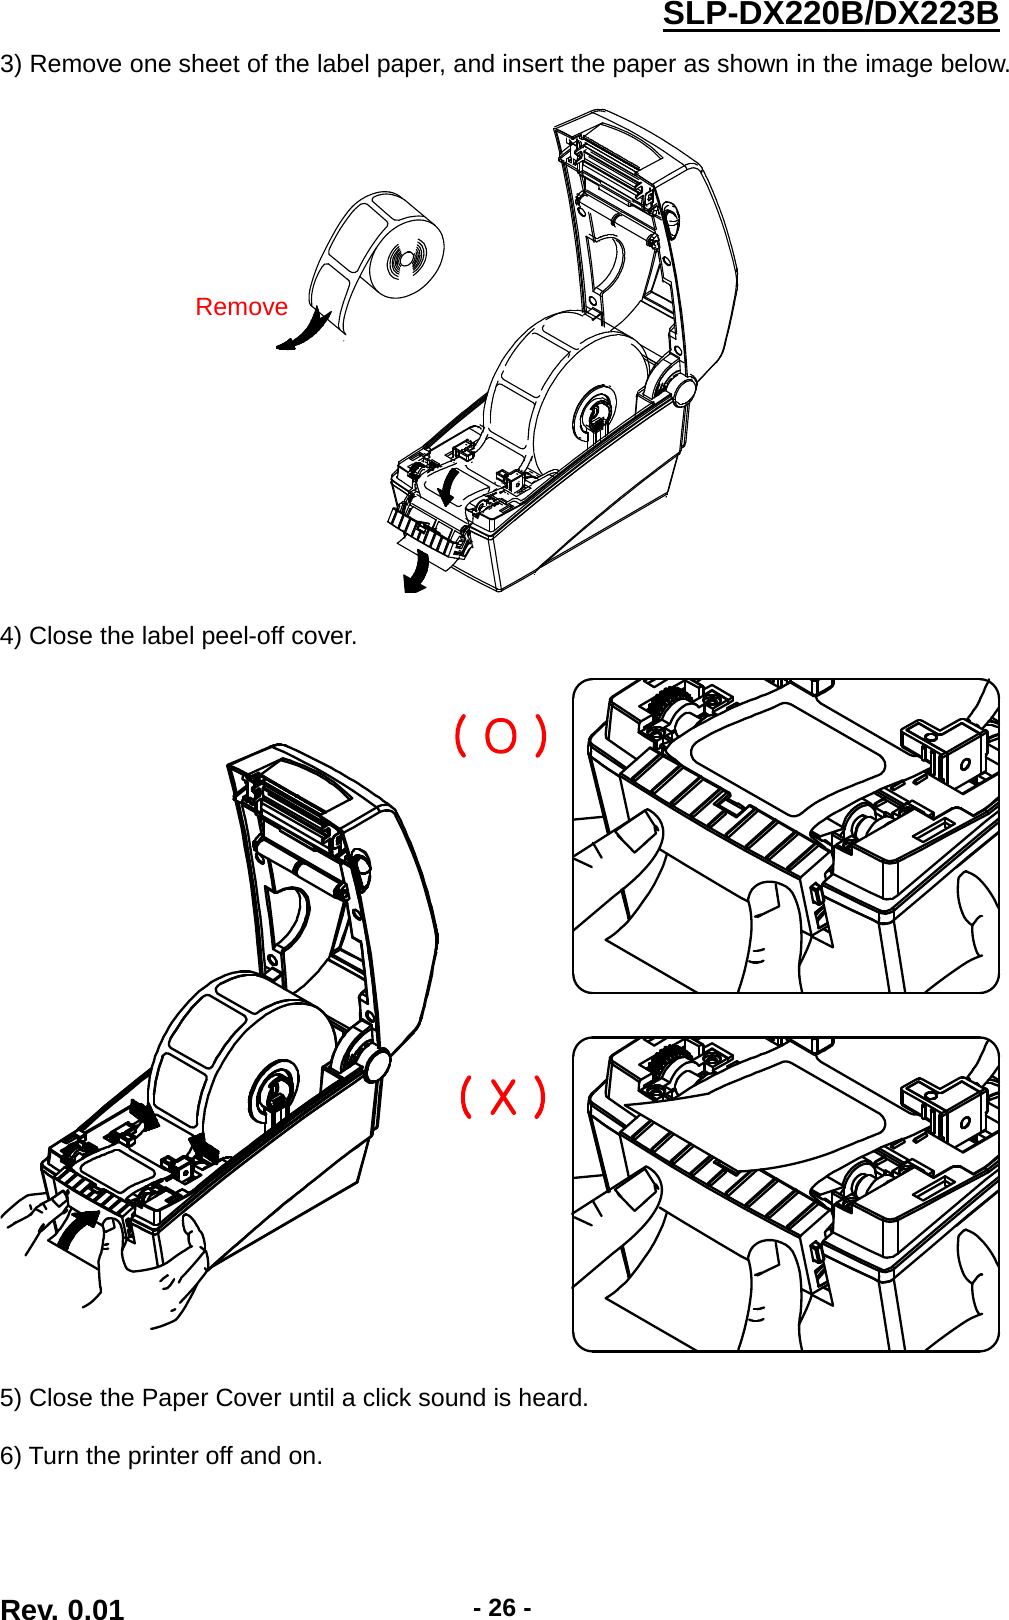  SLP-DX220B/DX223B  3) Remove one sheet of the label paper, and insert the paper as shown in the image below.      4) Close the label peel-off cover.    5) Close the Paper Cover until a click sound is heard.  6) Turn the printer off and on.   Remove ( O ) ( X ) Rev. 0.01  - 26 - 